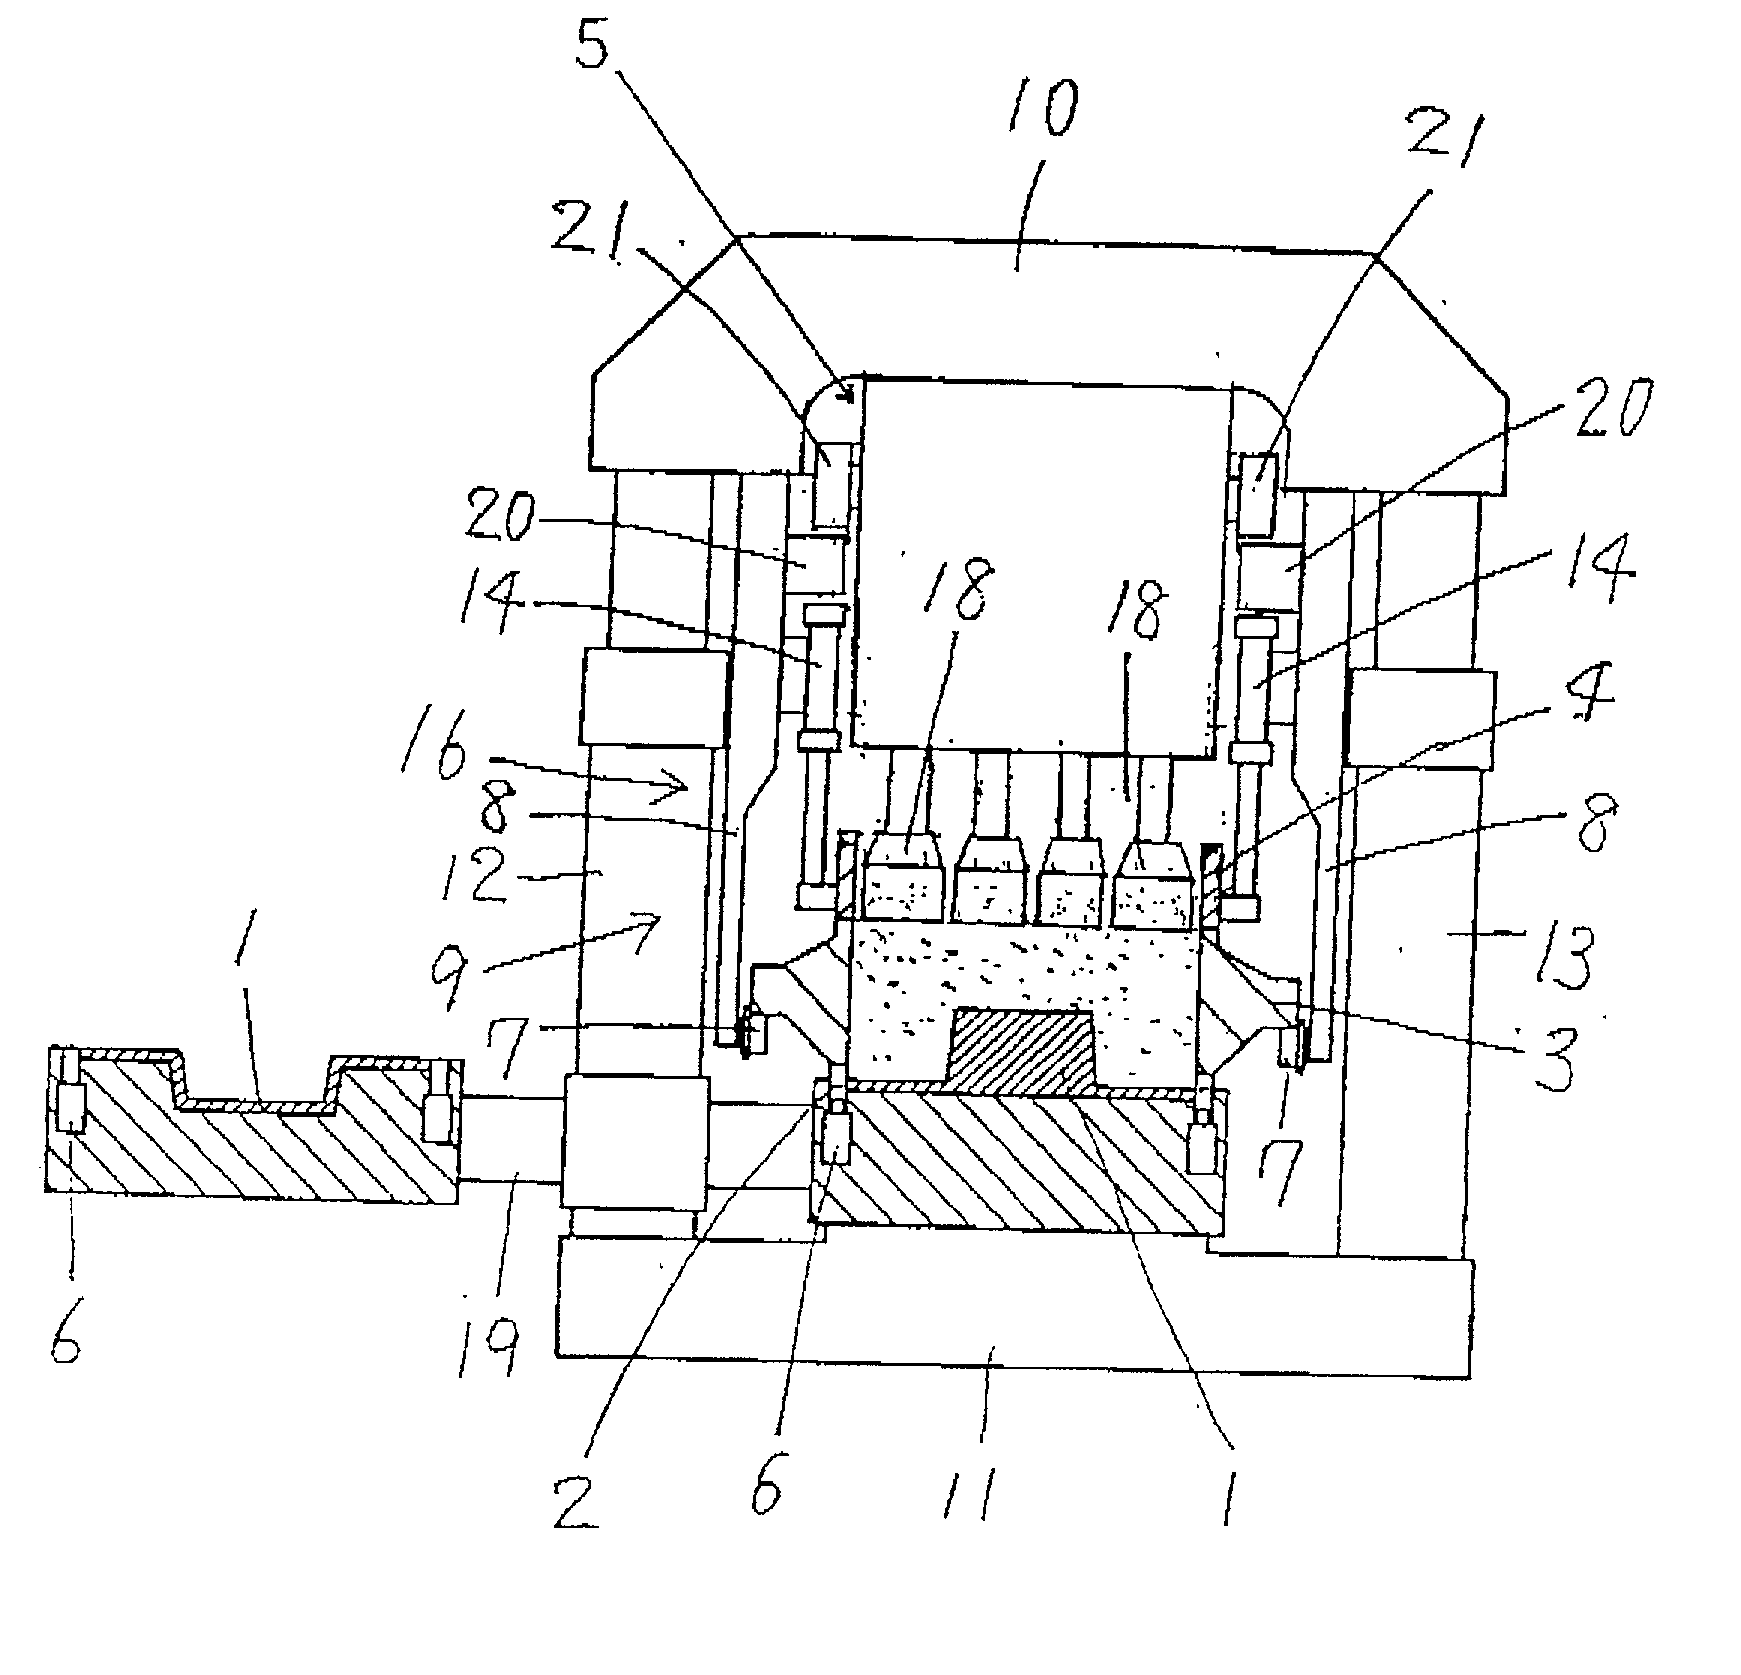 Method and apparatus for compacting molding sand